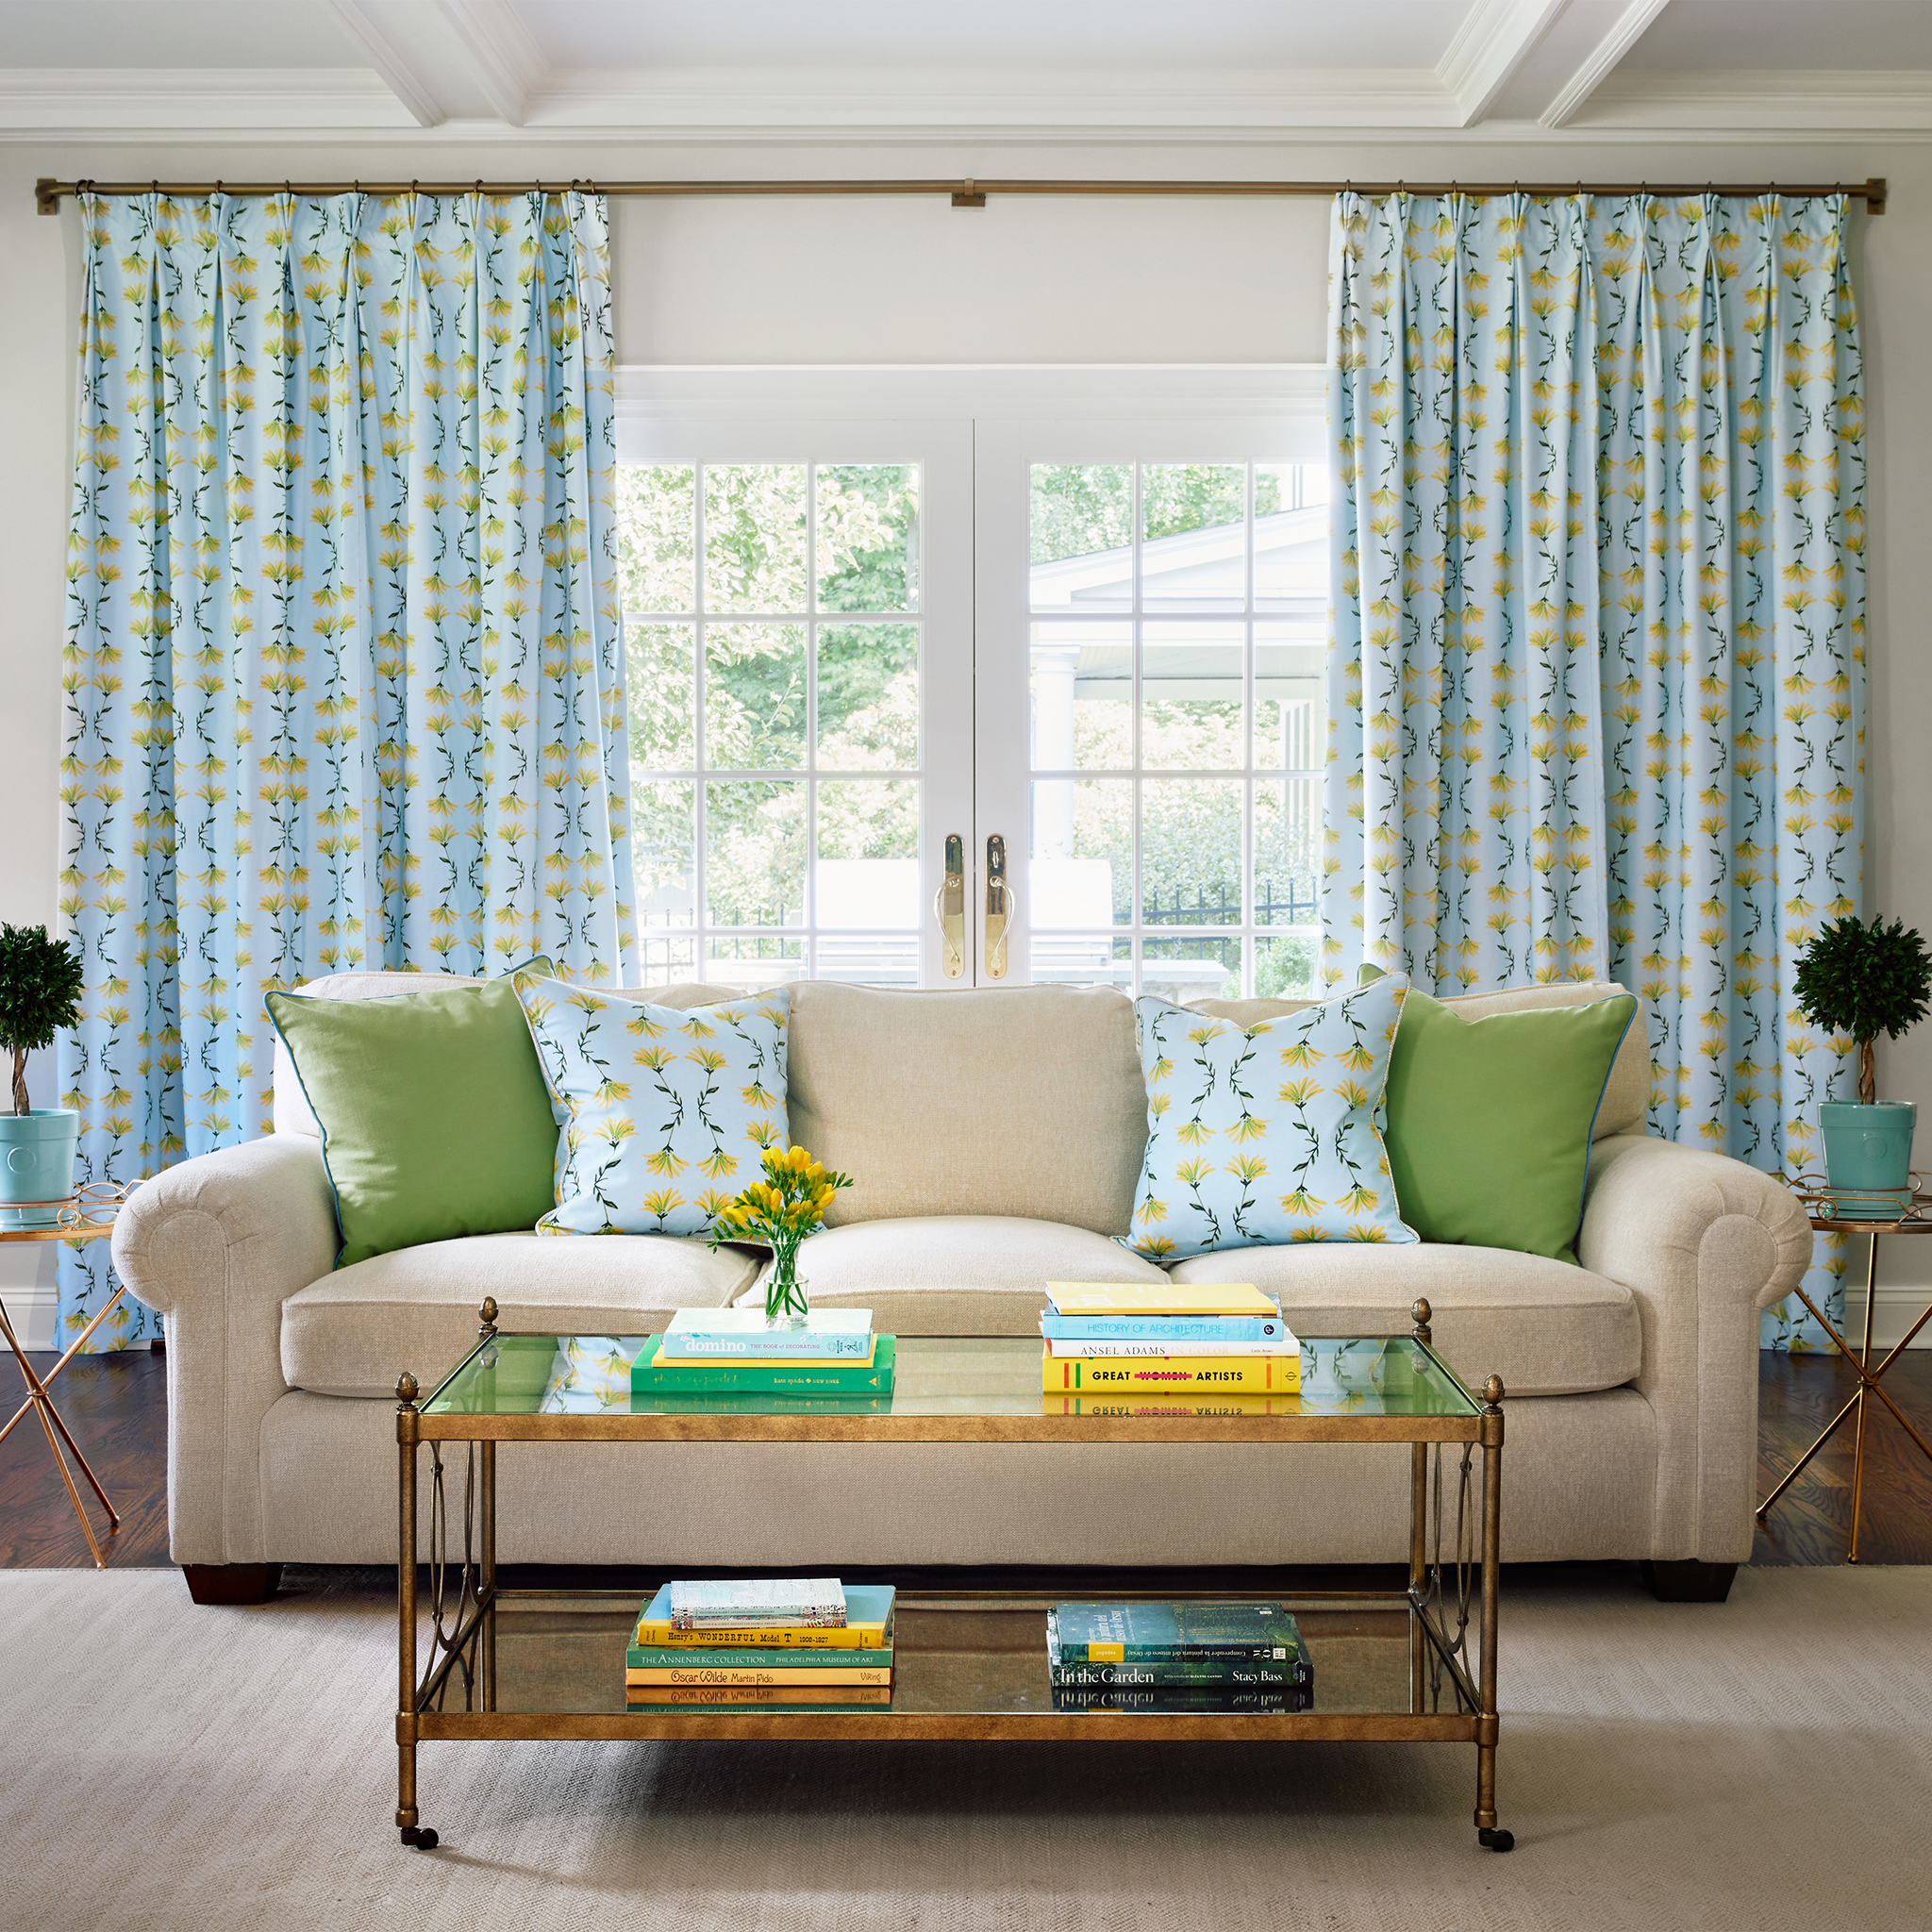 How to Add Curtain Trim Tape for a Custom Look - The Turquoise Home